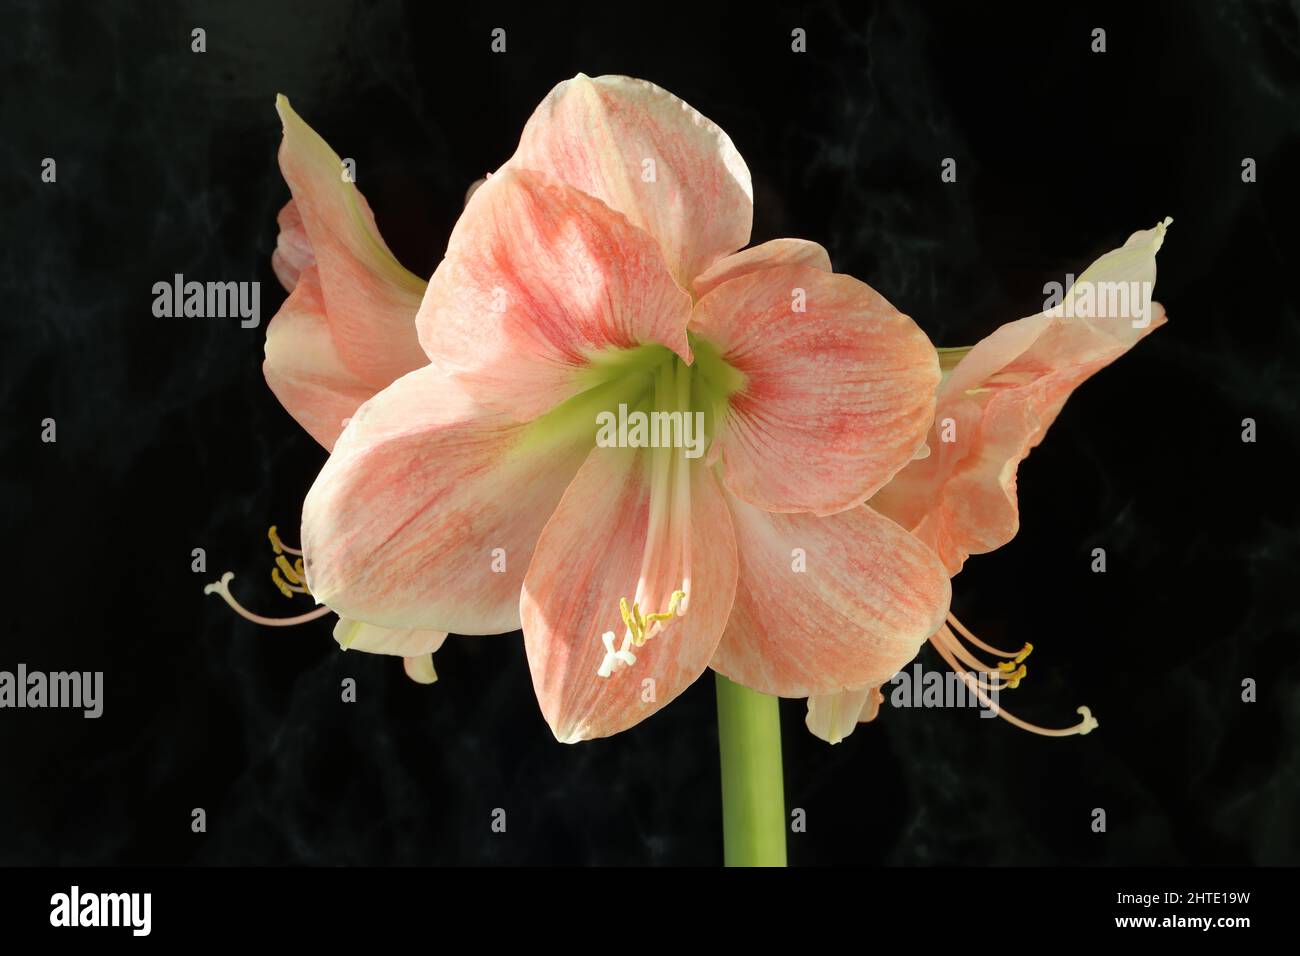 close-up of a beautiful salmon pink hippeastrum flower against a dark background Stock Photo